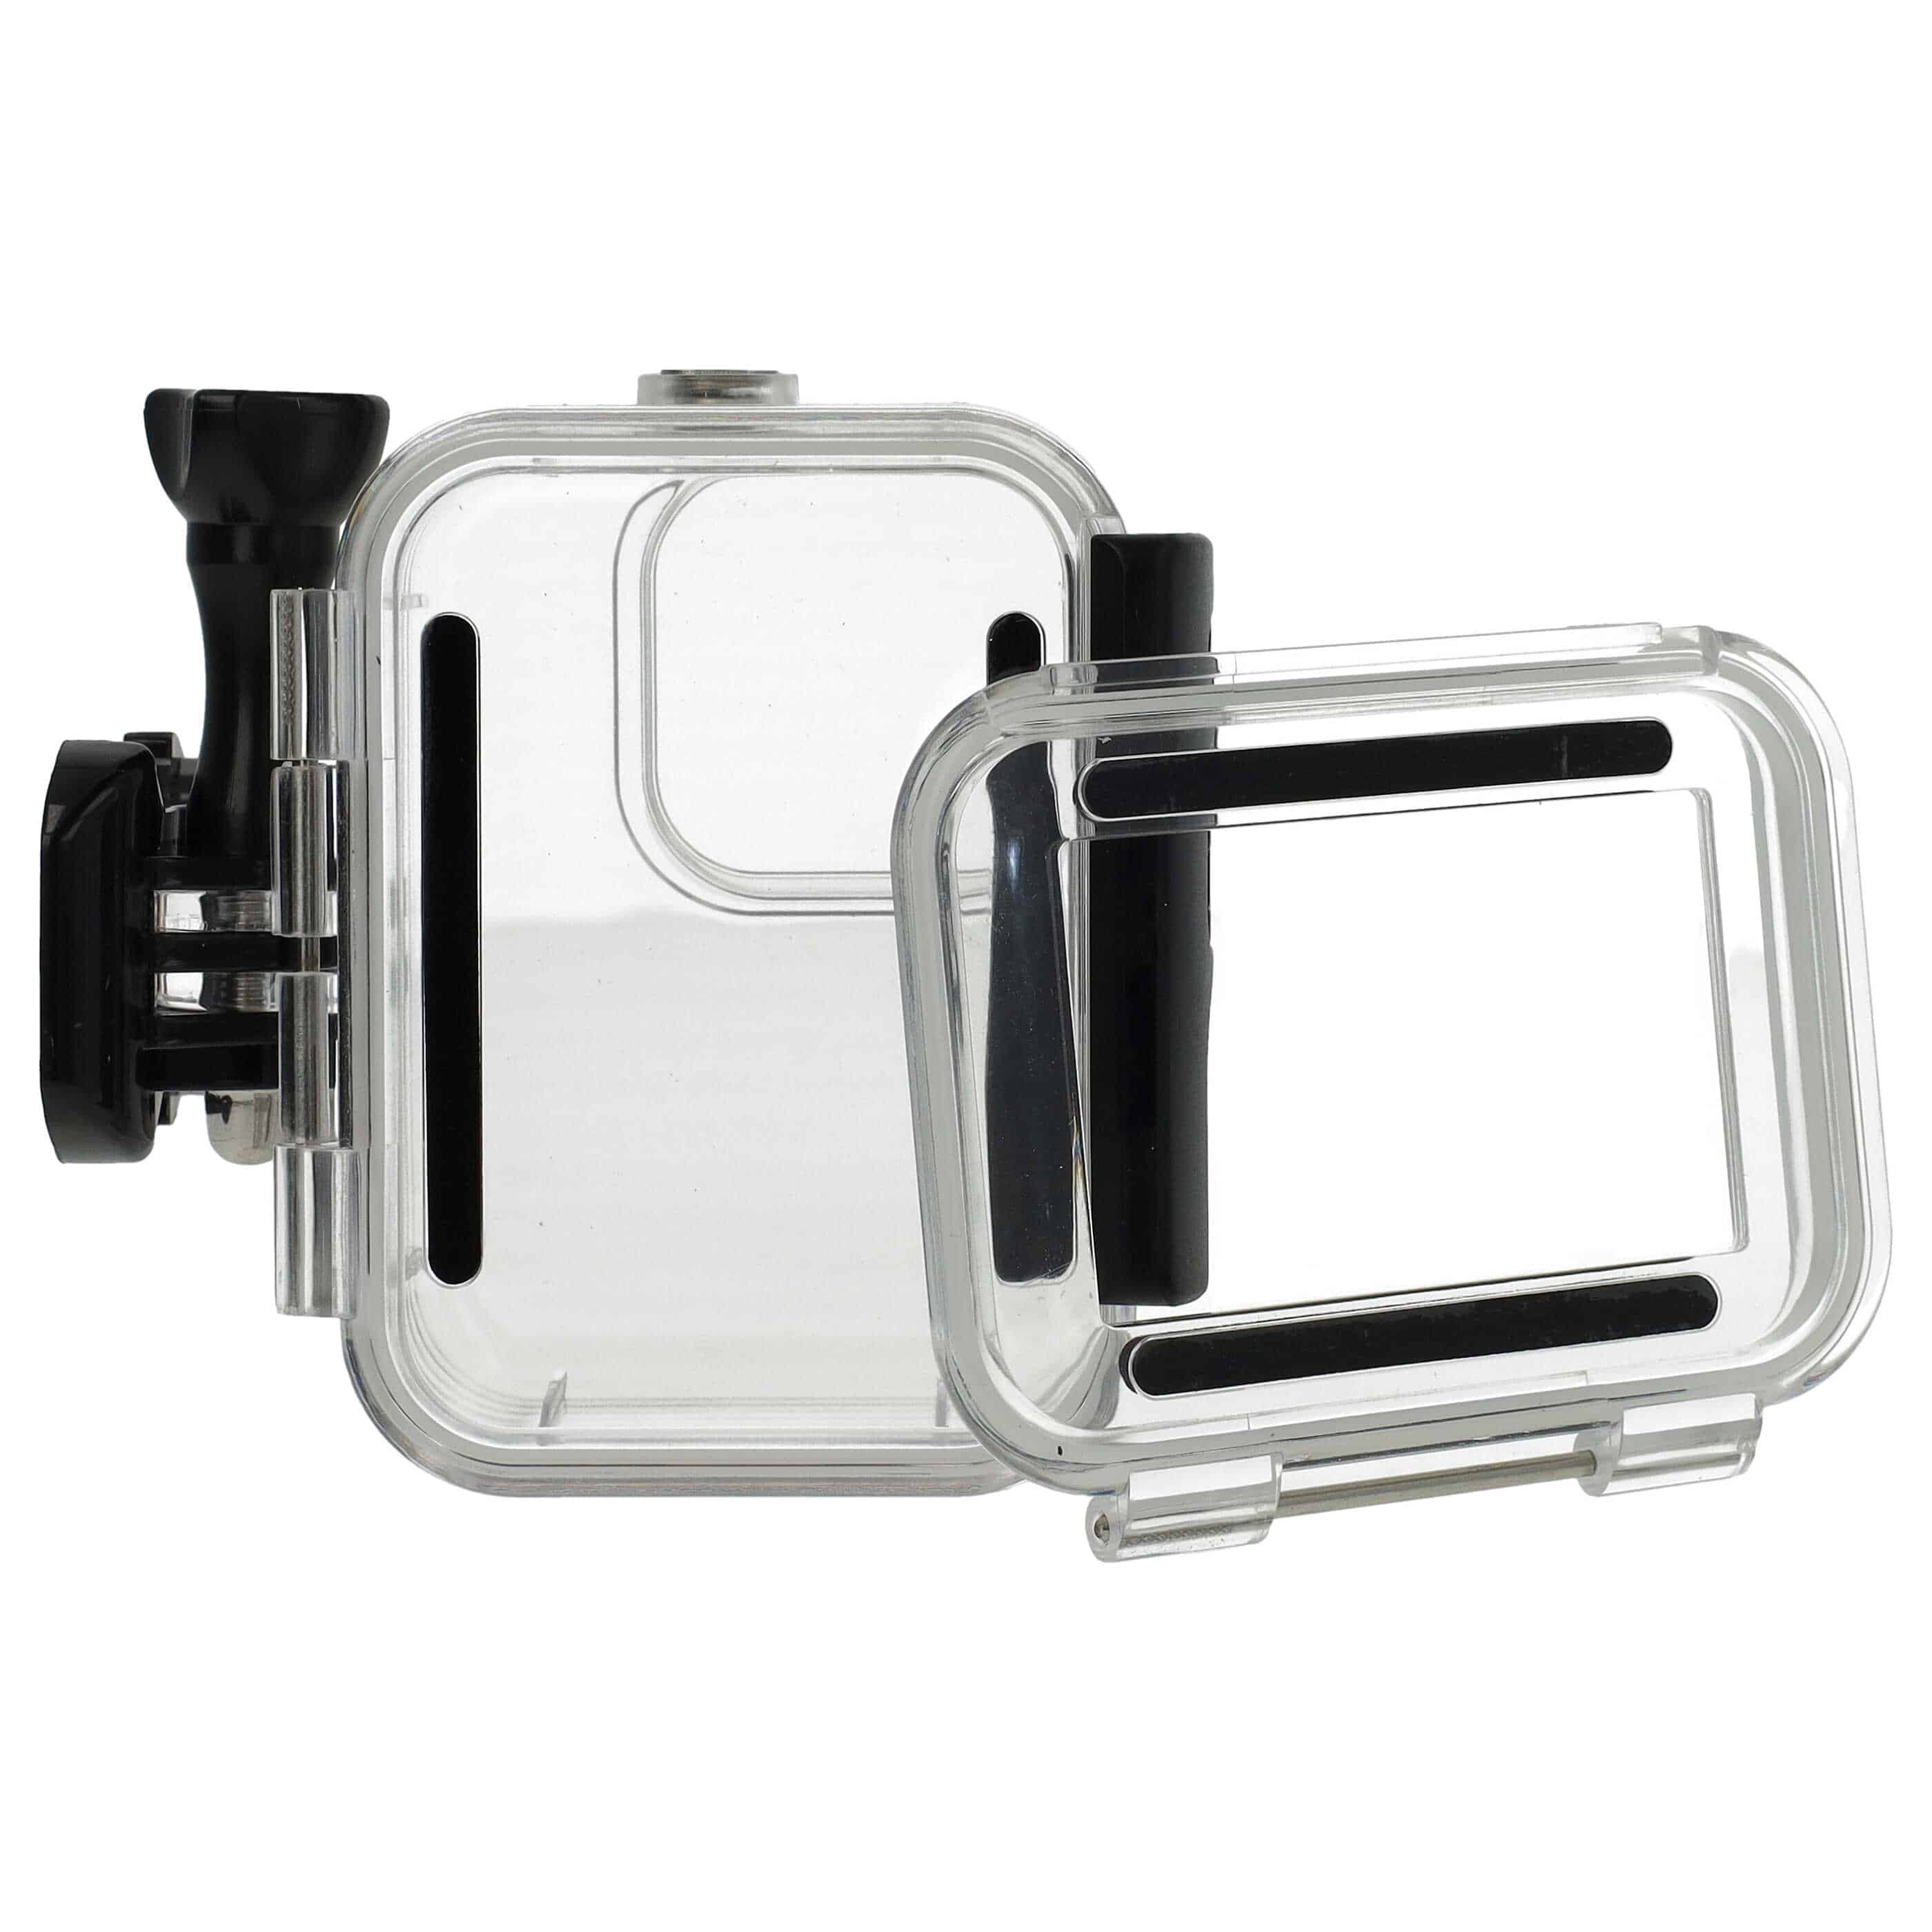 Underwater Housing suitable for GoPro Hero 9, 10, 11 Action Camera - Up to a max. Depth of 60 m